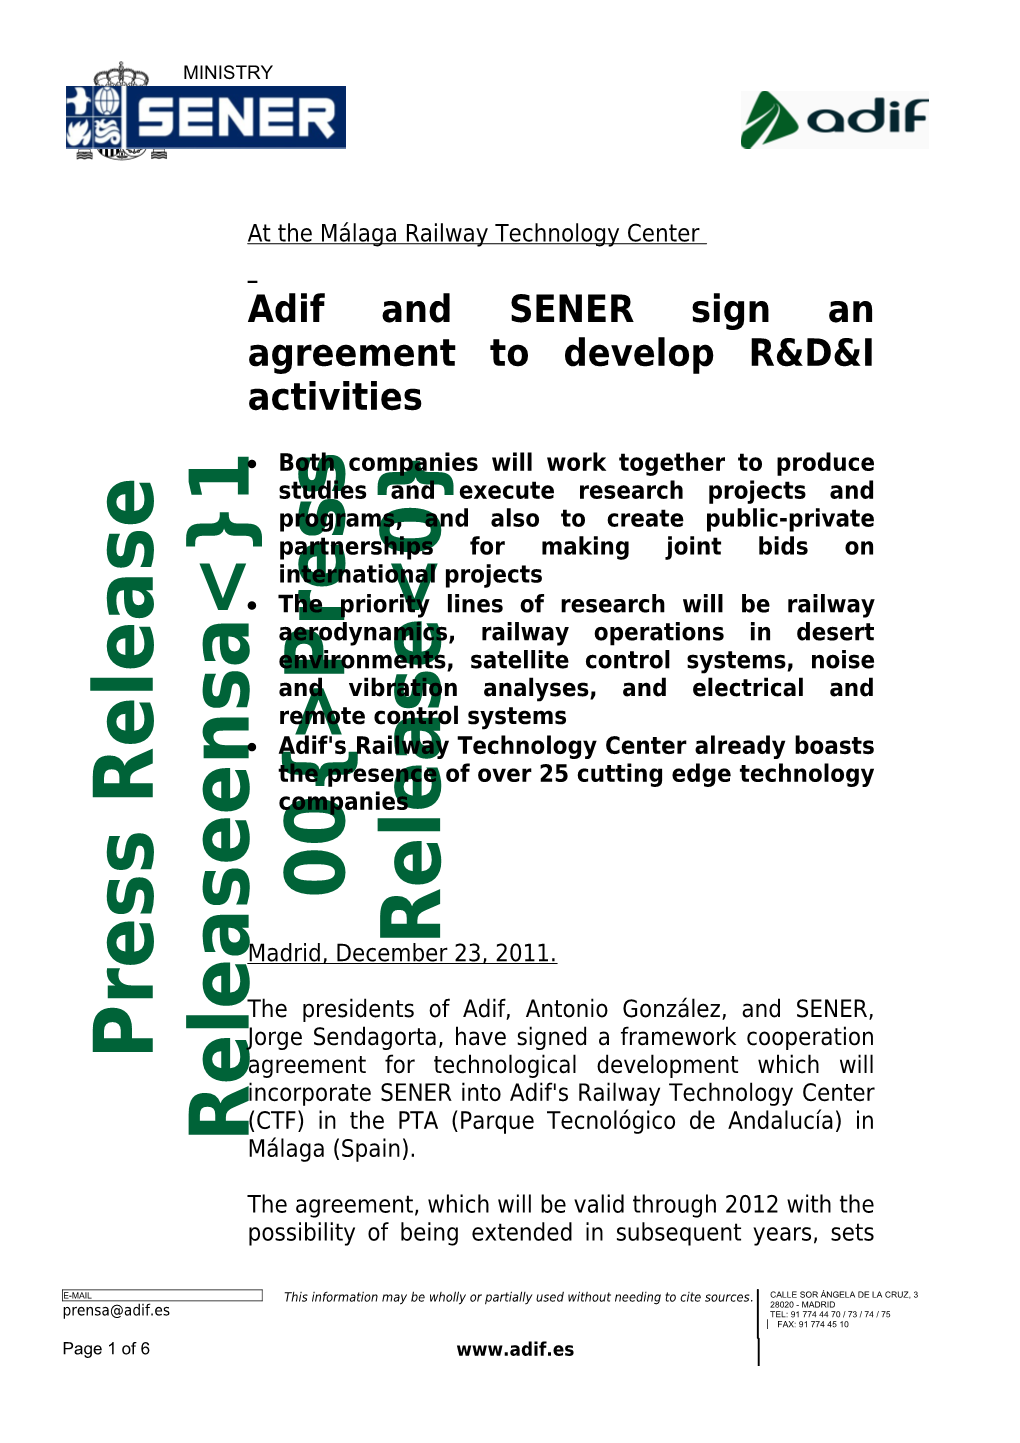 Adif and SENER Sign an Agreement to Develop R&D&I Activities